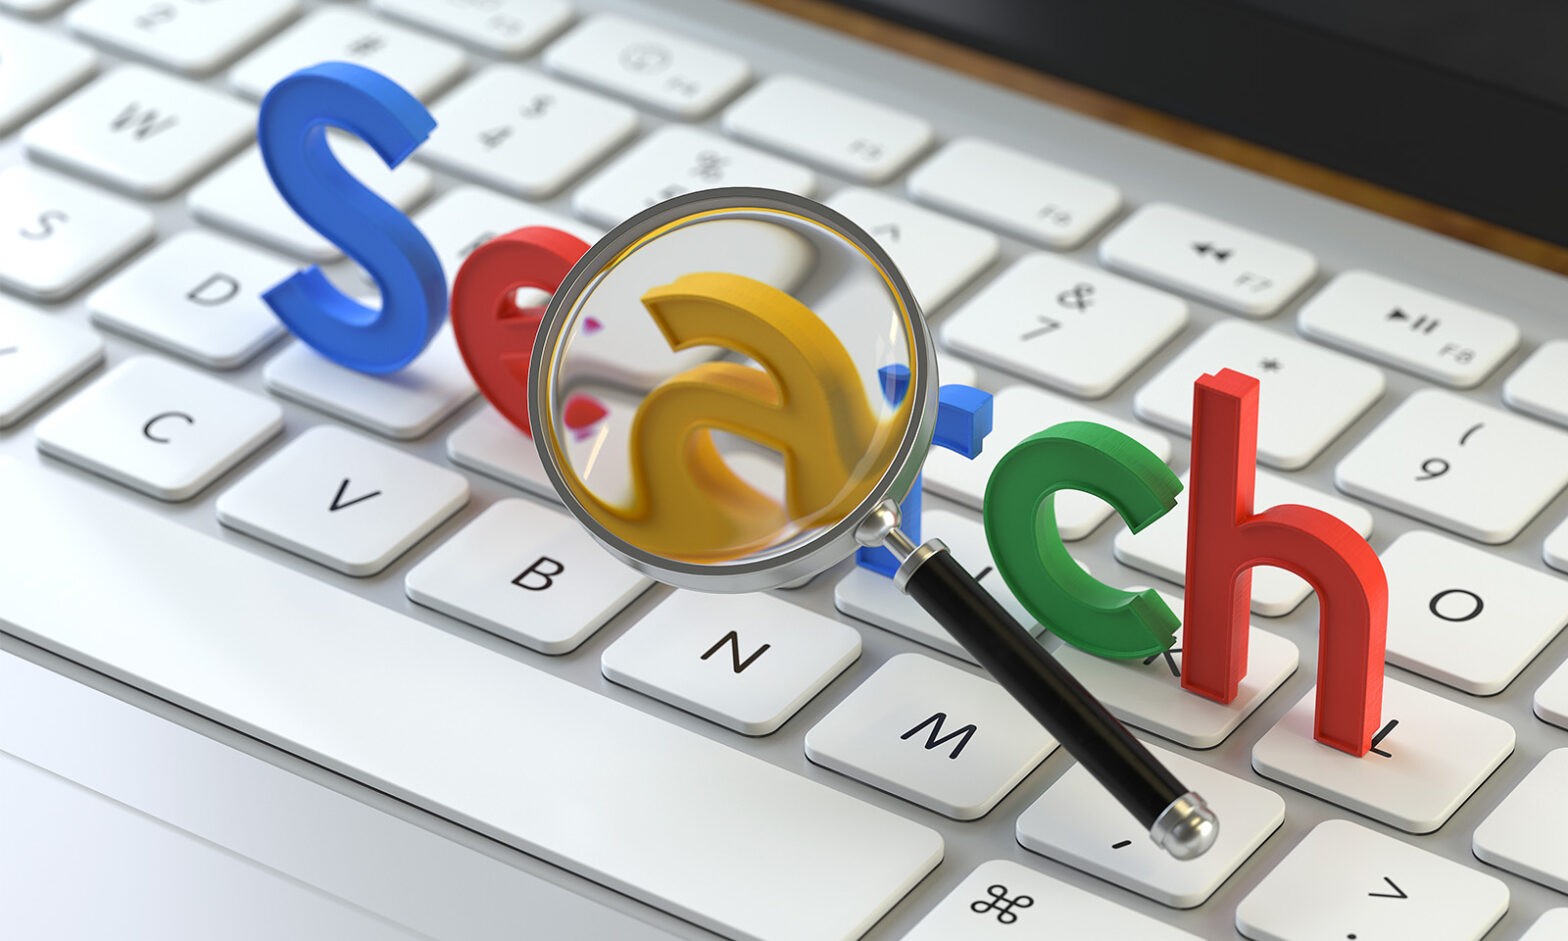 Featured image for post: How To Use Content To Improve Your Google Business Profile Listing